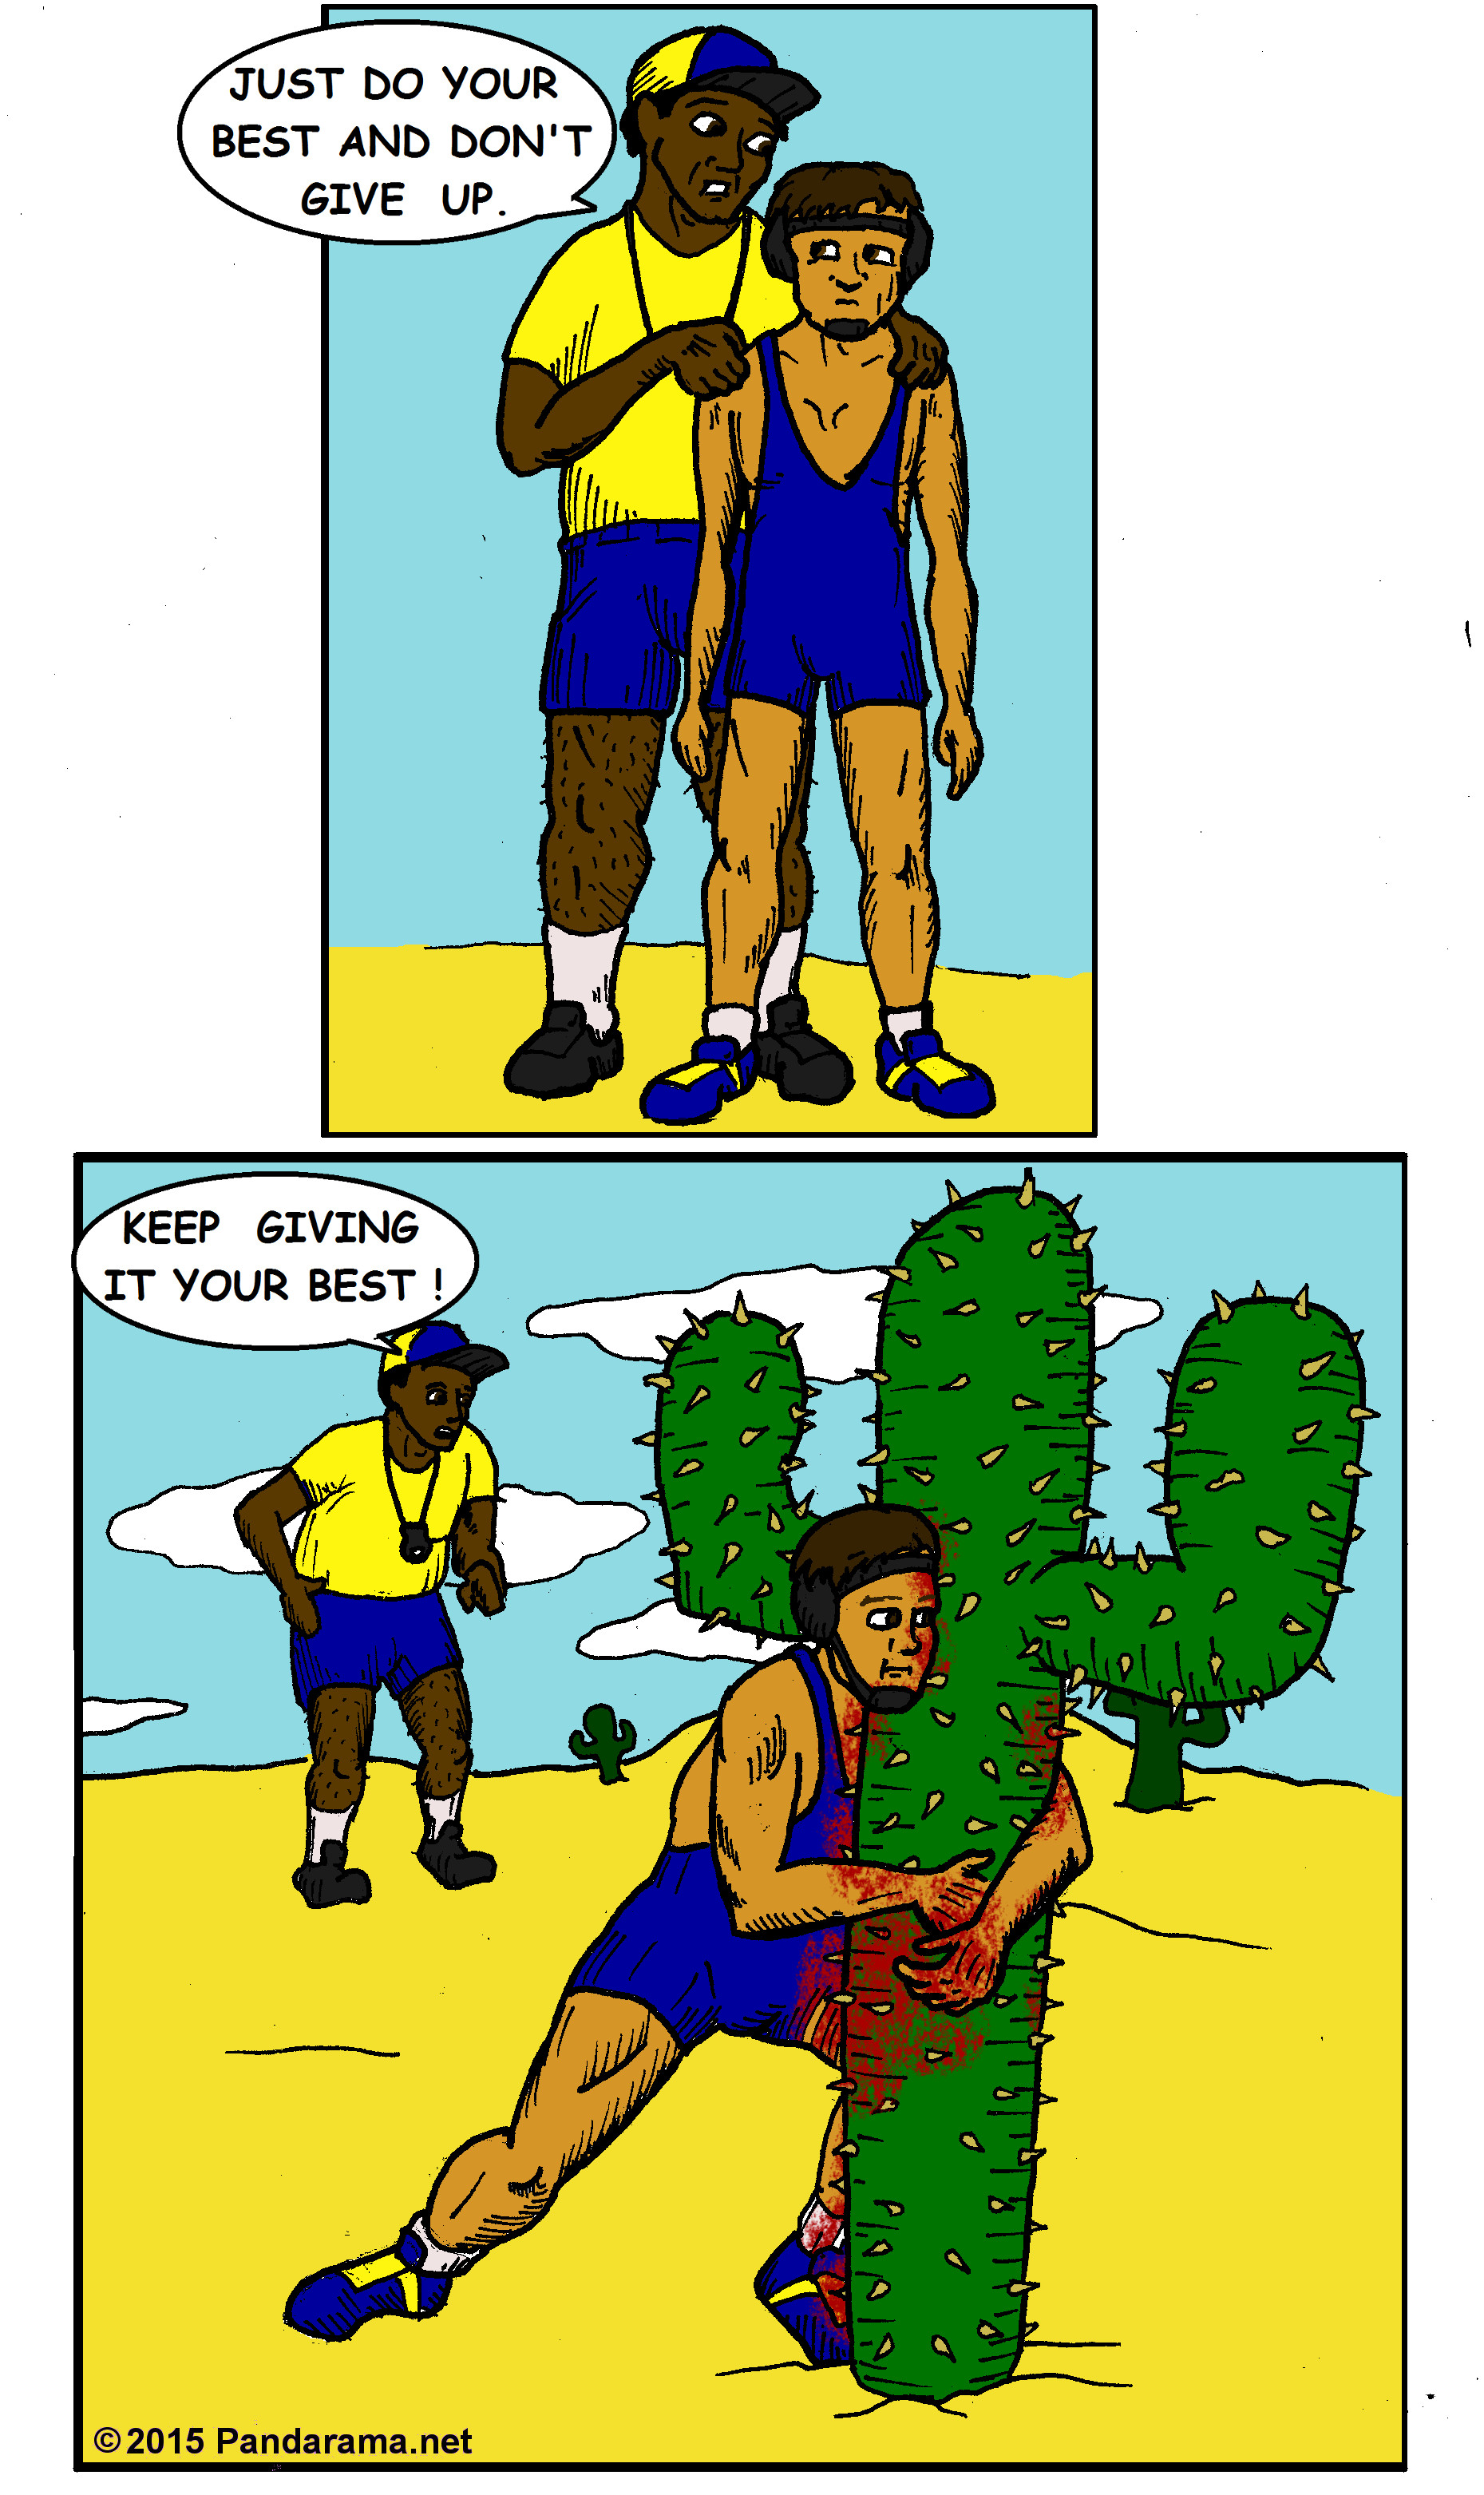 Pandarama cartoon of a wrestler wrestling a cactus. persevere. perseverence. beliveinyourself. never give up.